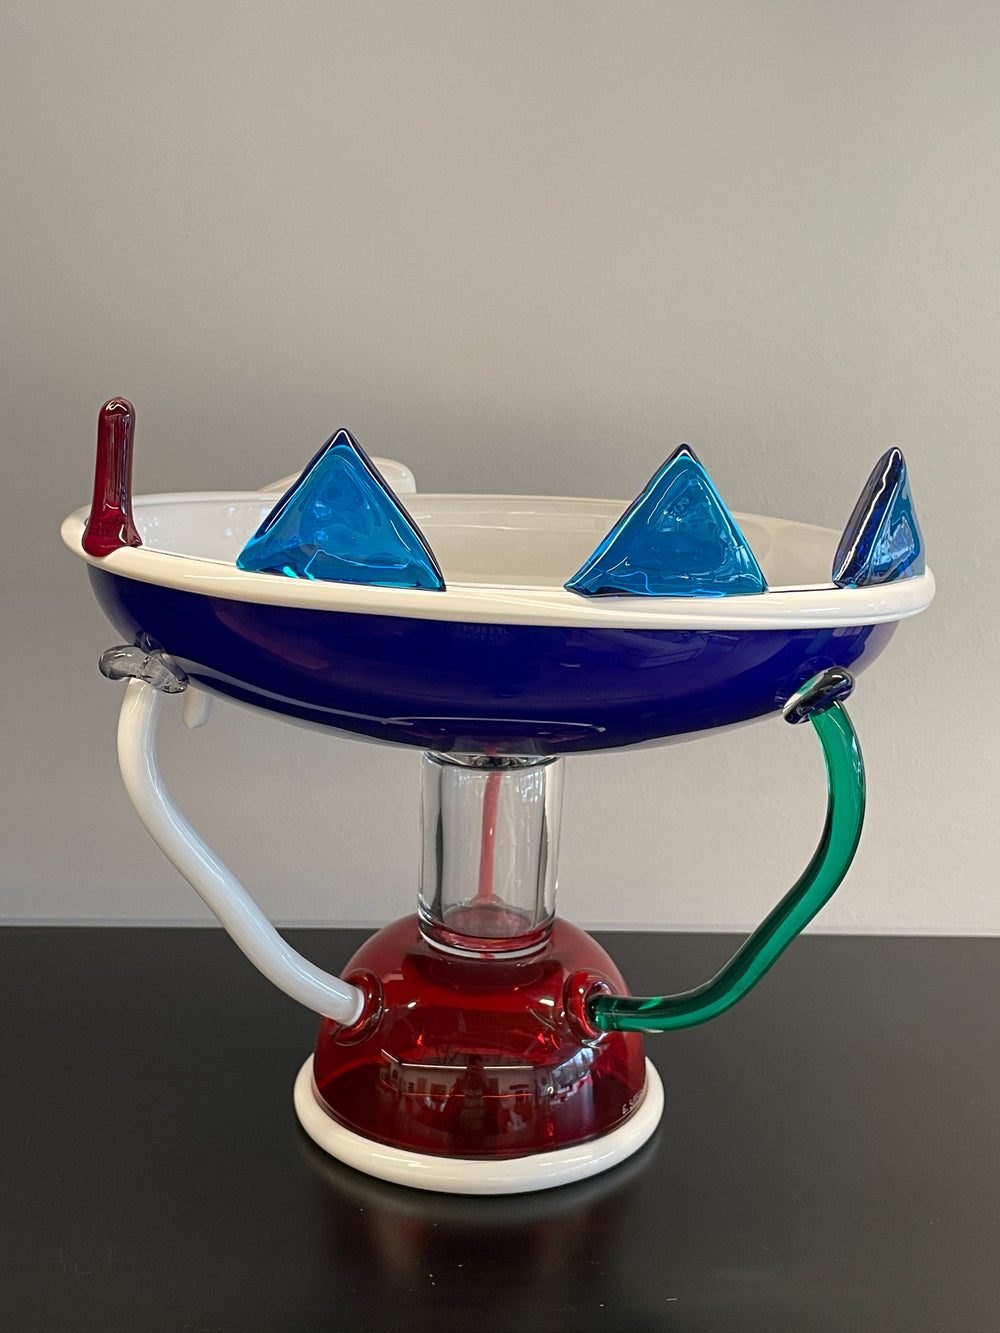 Ettore Sottsass "Sol" fruit bowl for Compagnia Vetraria Muranese for Memphis Italy, 1982